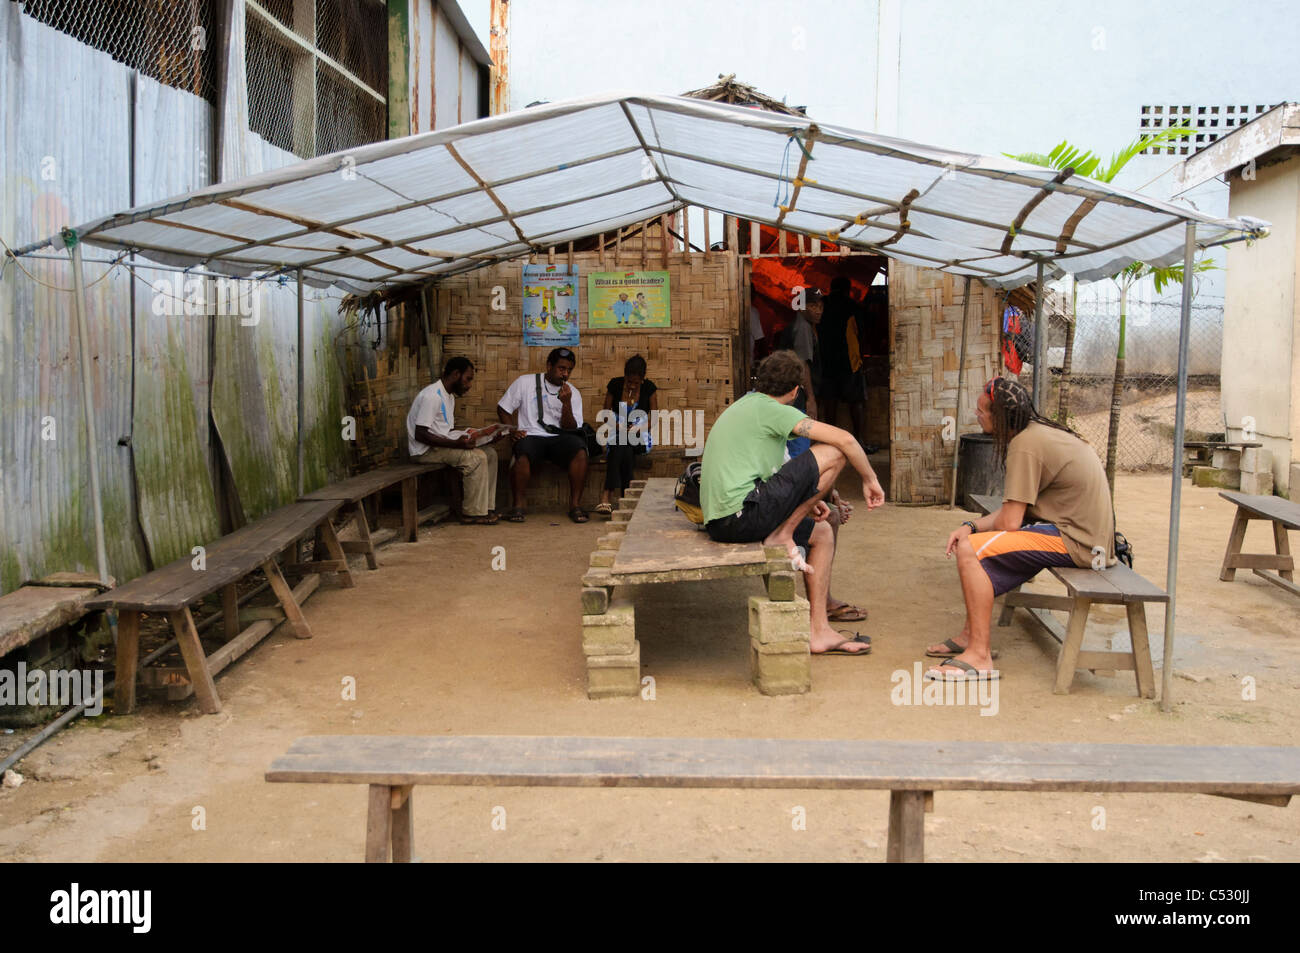 Nakamal, or kava bar, in a South Pacific town Stock Photo